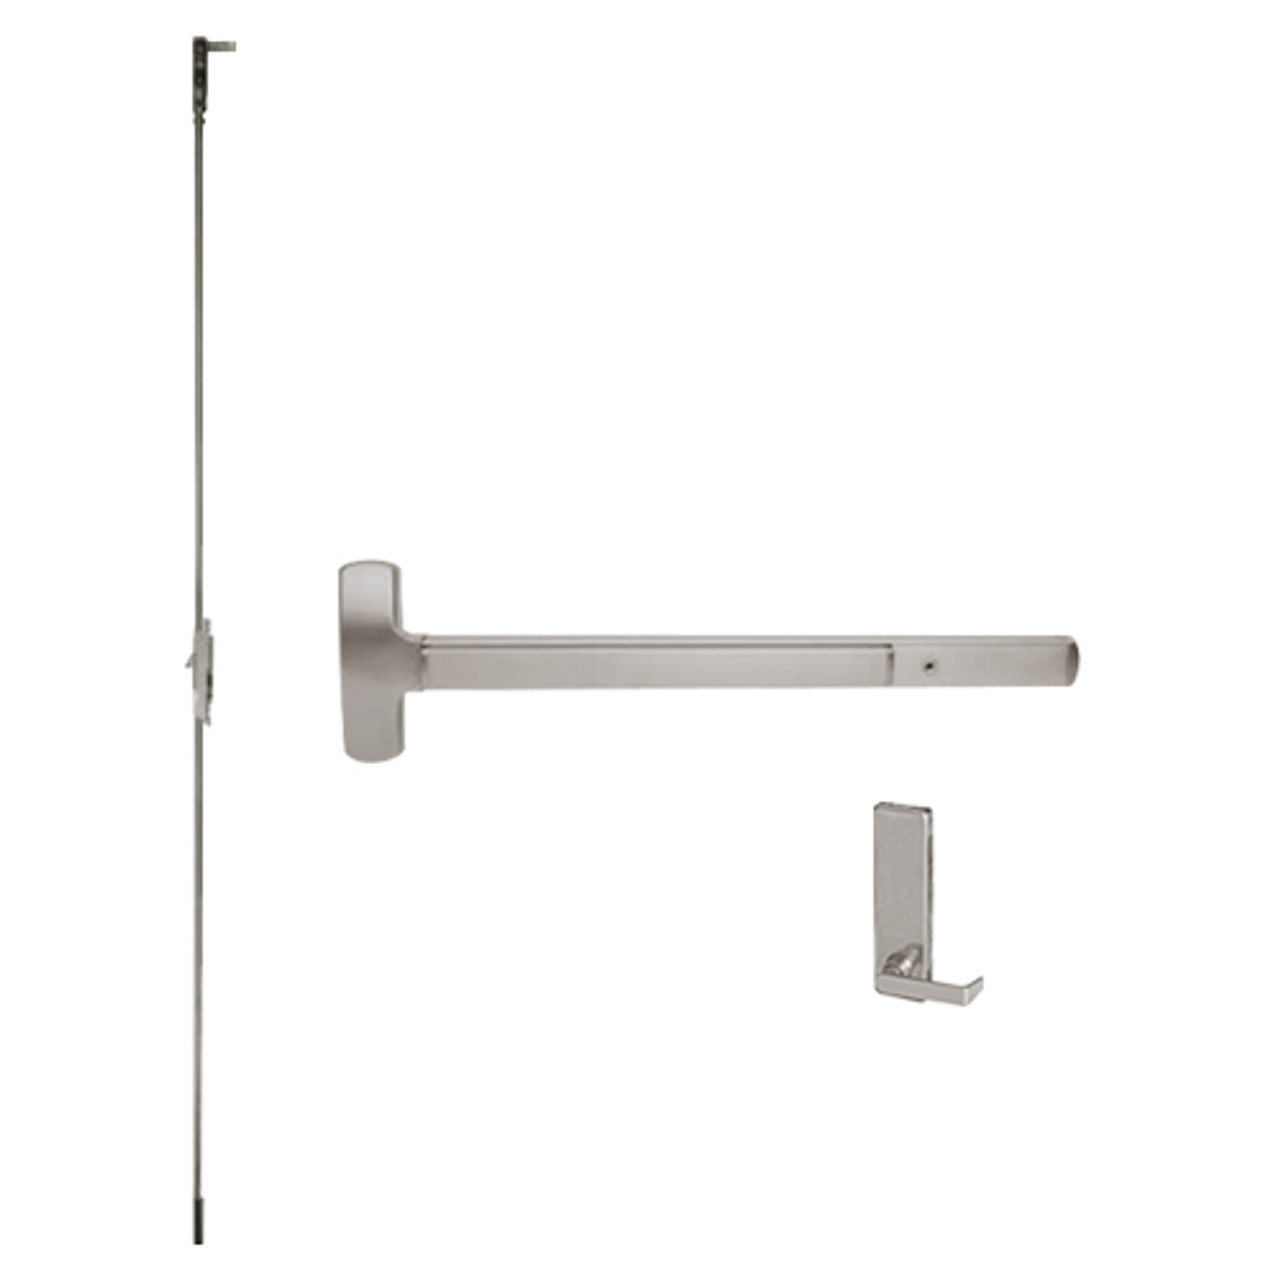 25-C-L-BE-DANE-US32D-4-RHR Falcon Exit Device in Satin Stainless Steel